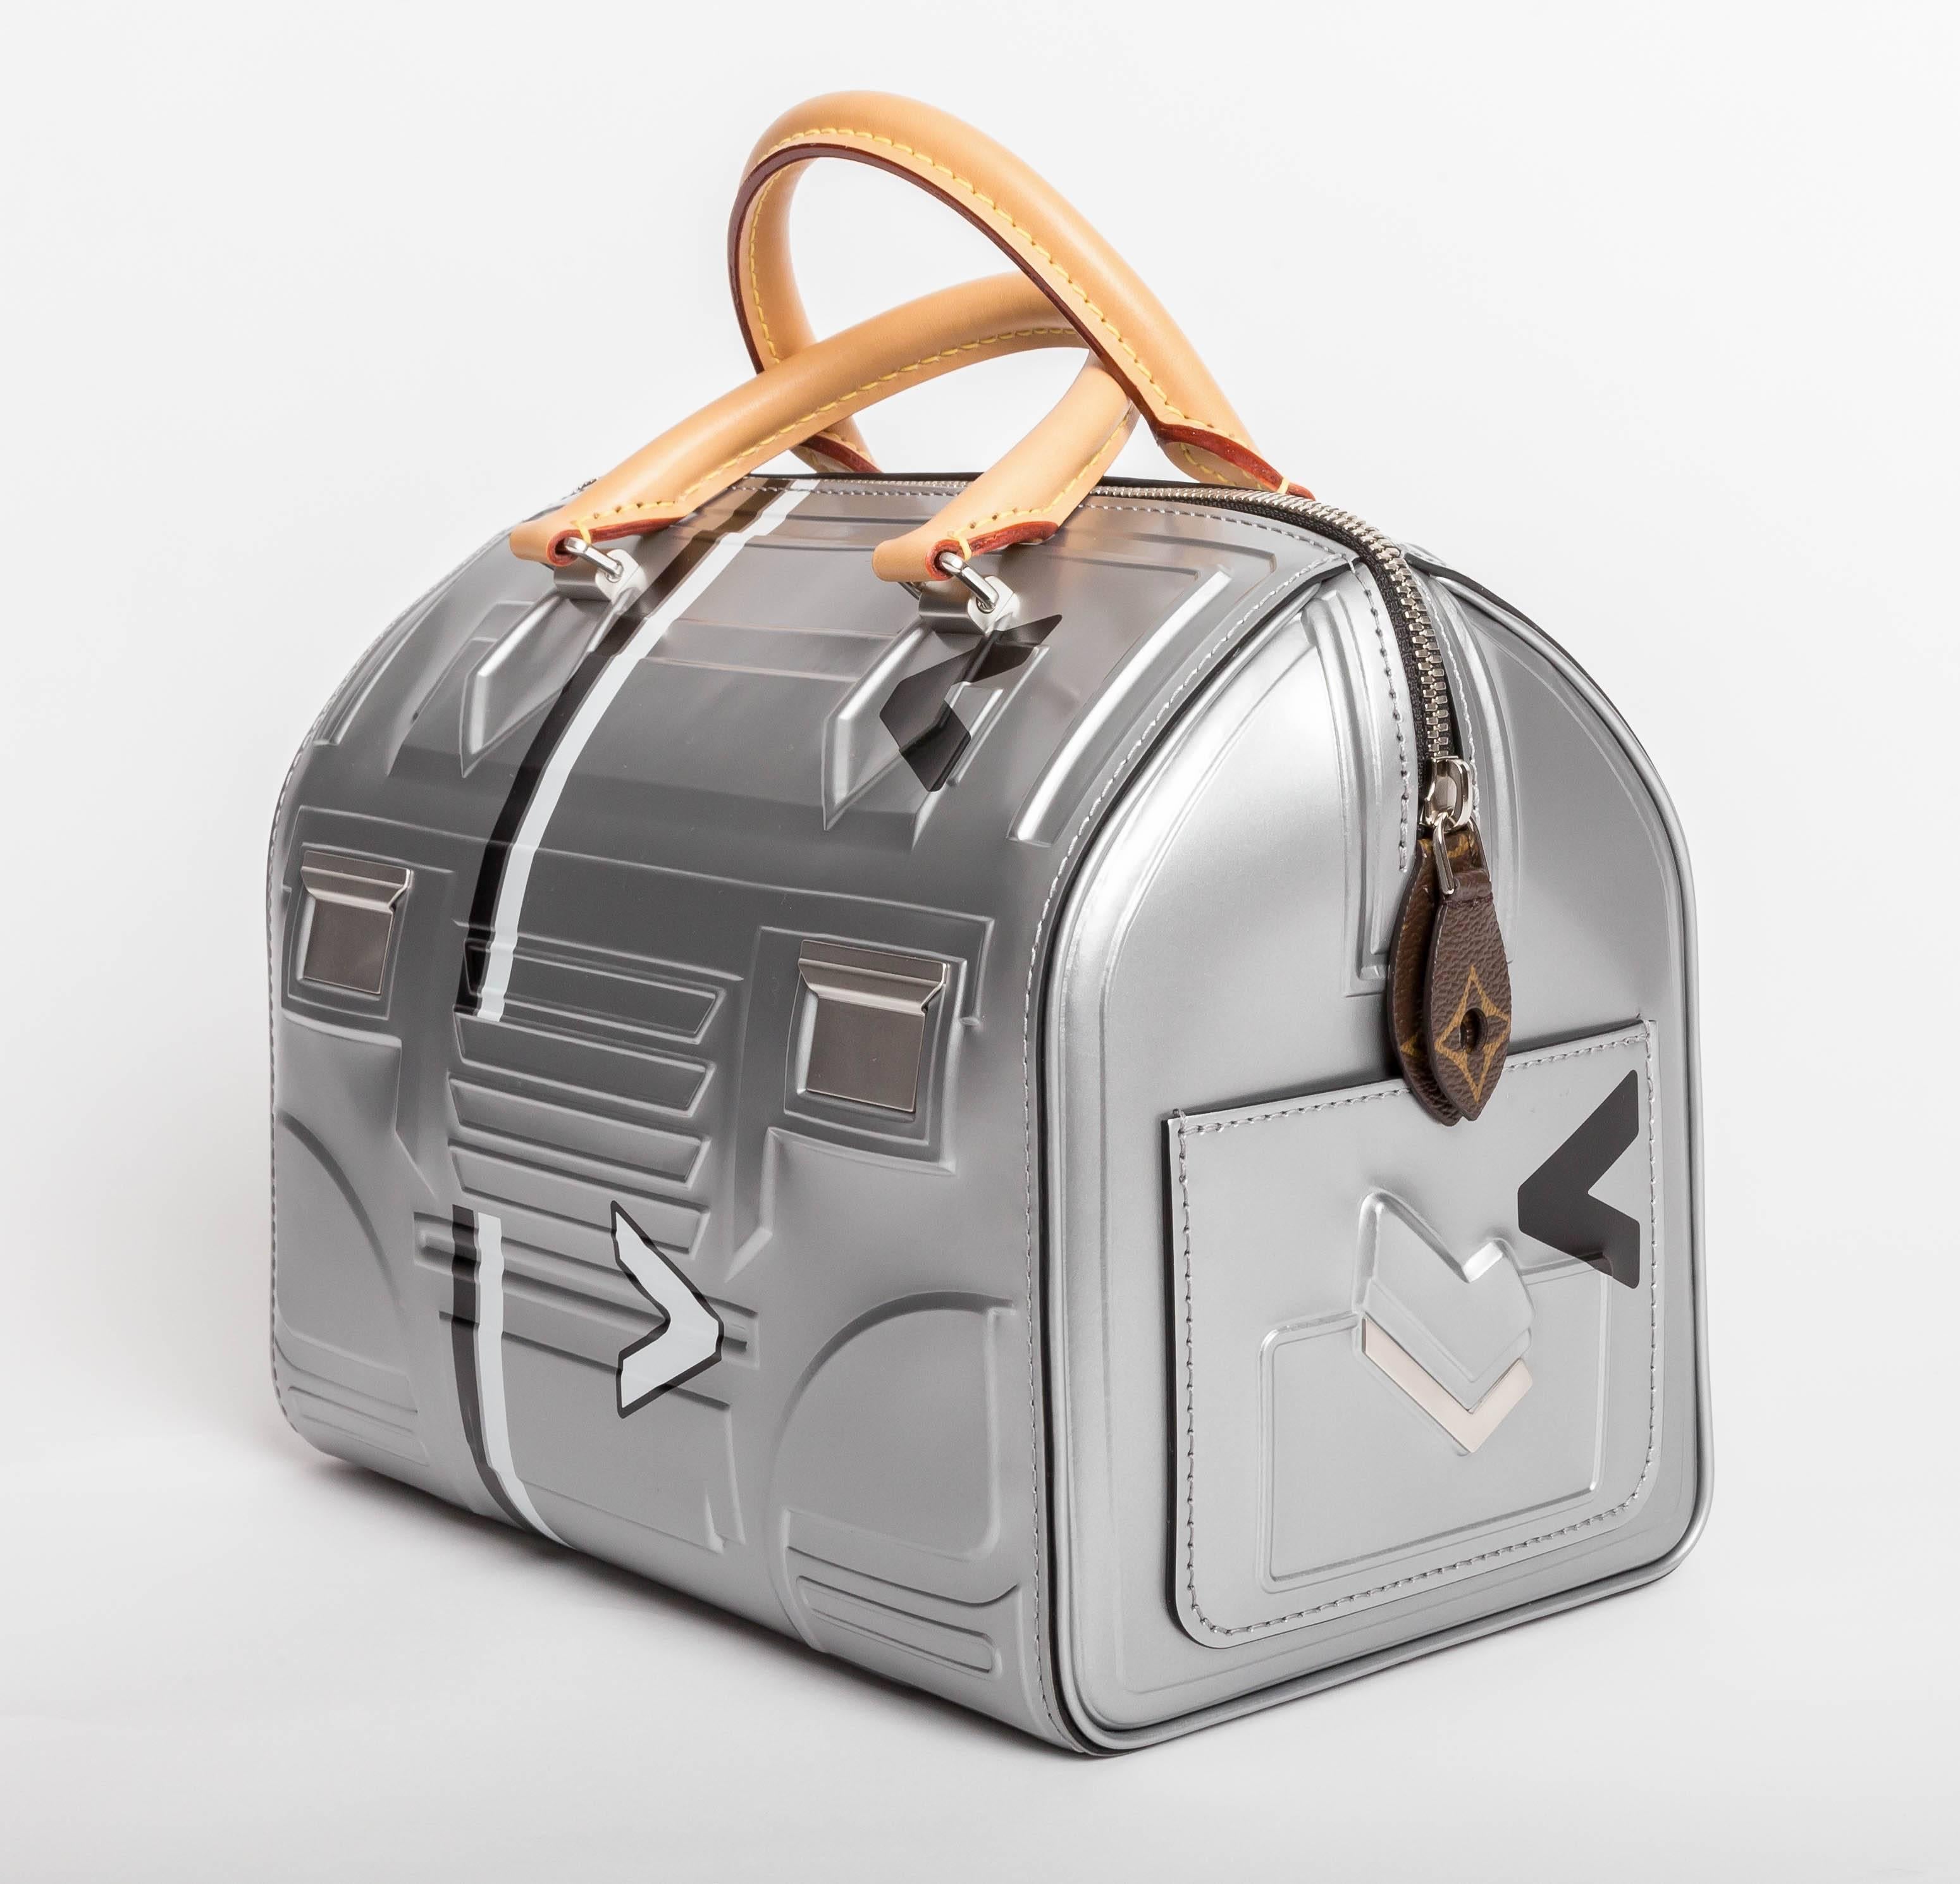 Louis Vuitton's latest limited edition speedy in silver - Fall / Winter 2017
Only 60 of these bags were made for the US market.
Includes dustbag and lock. 
This fabulous and very rare handbag has never been used and is in perfect condition.